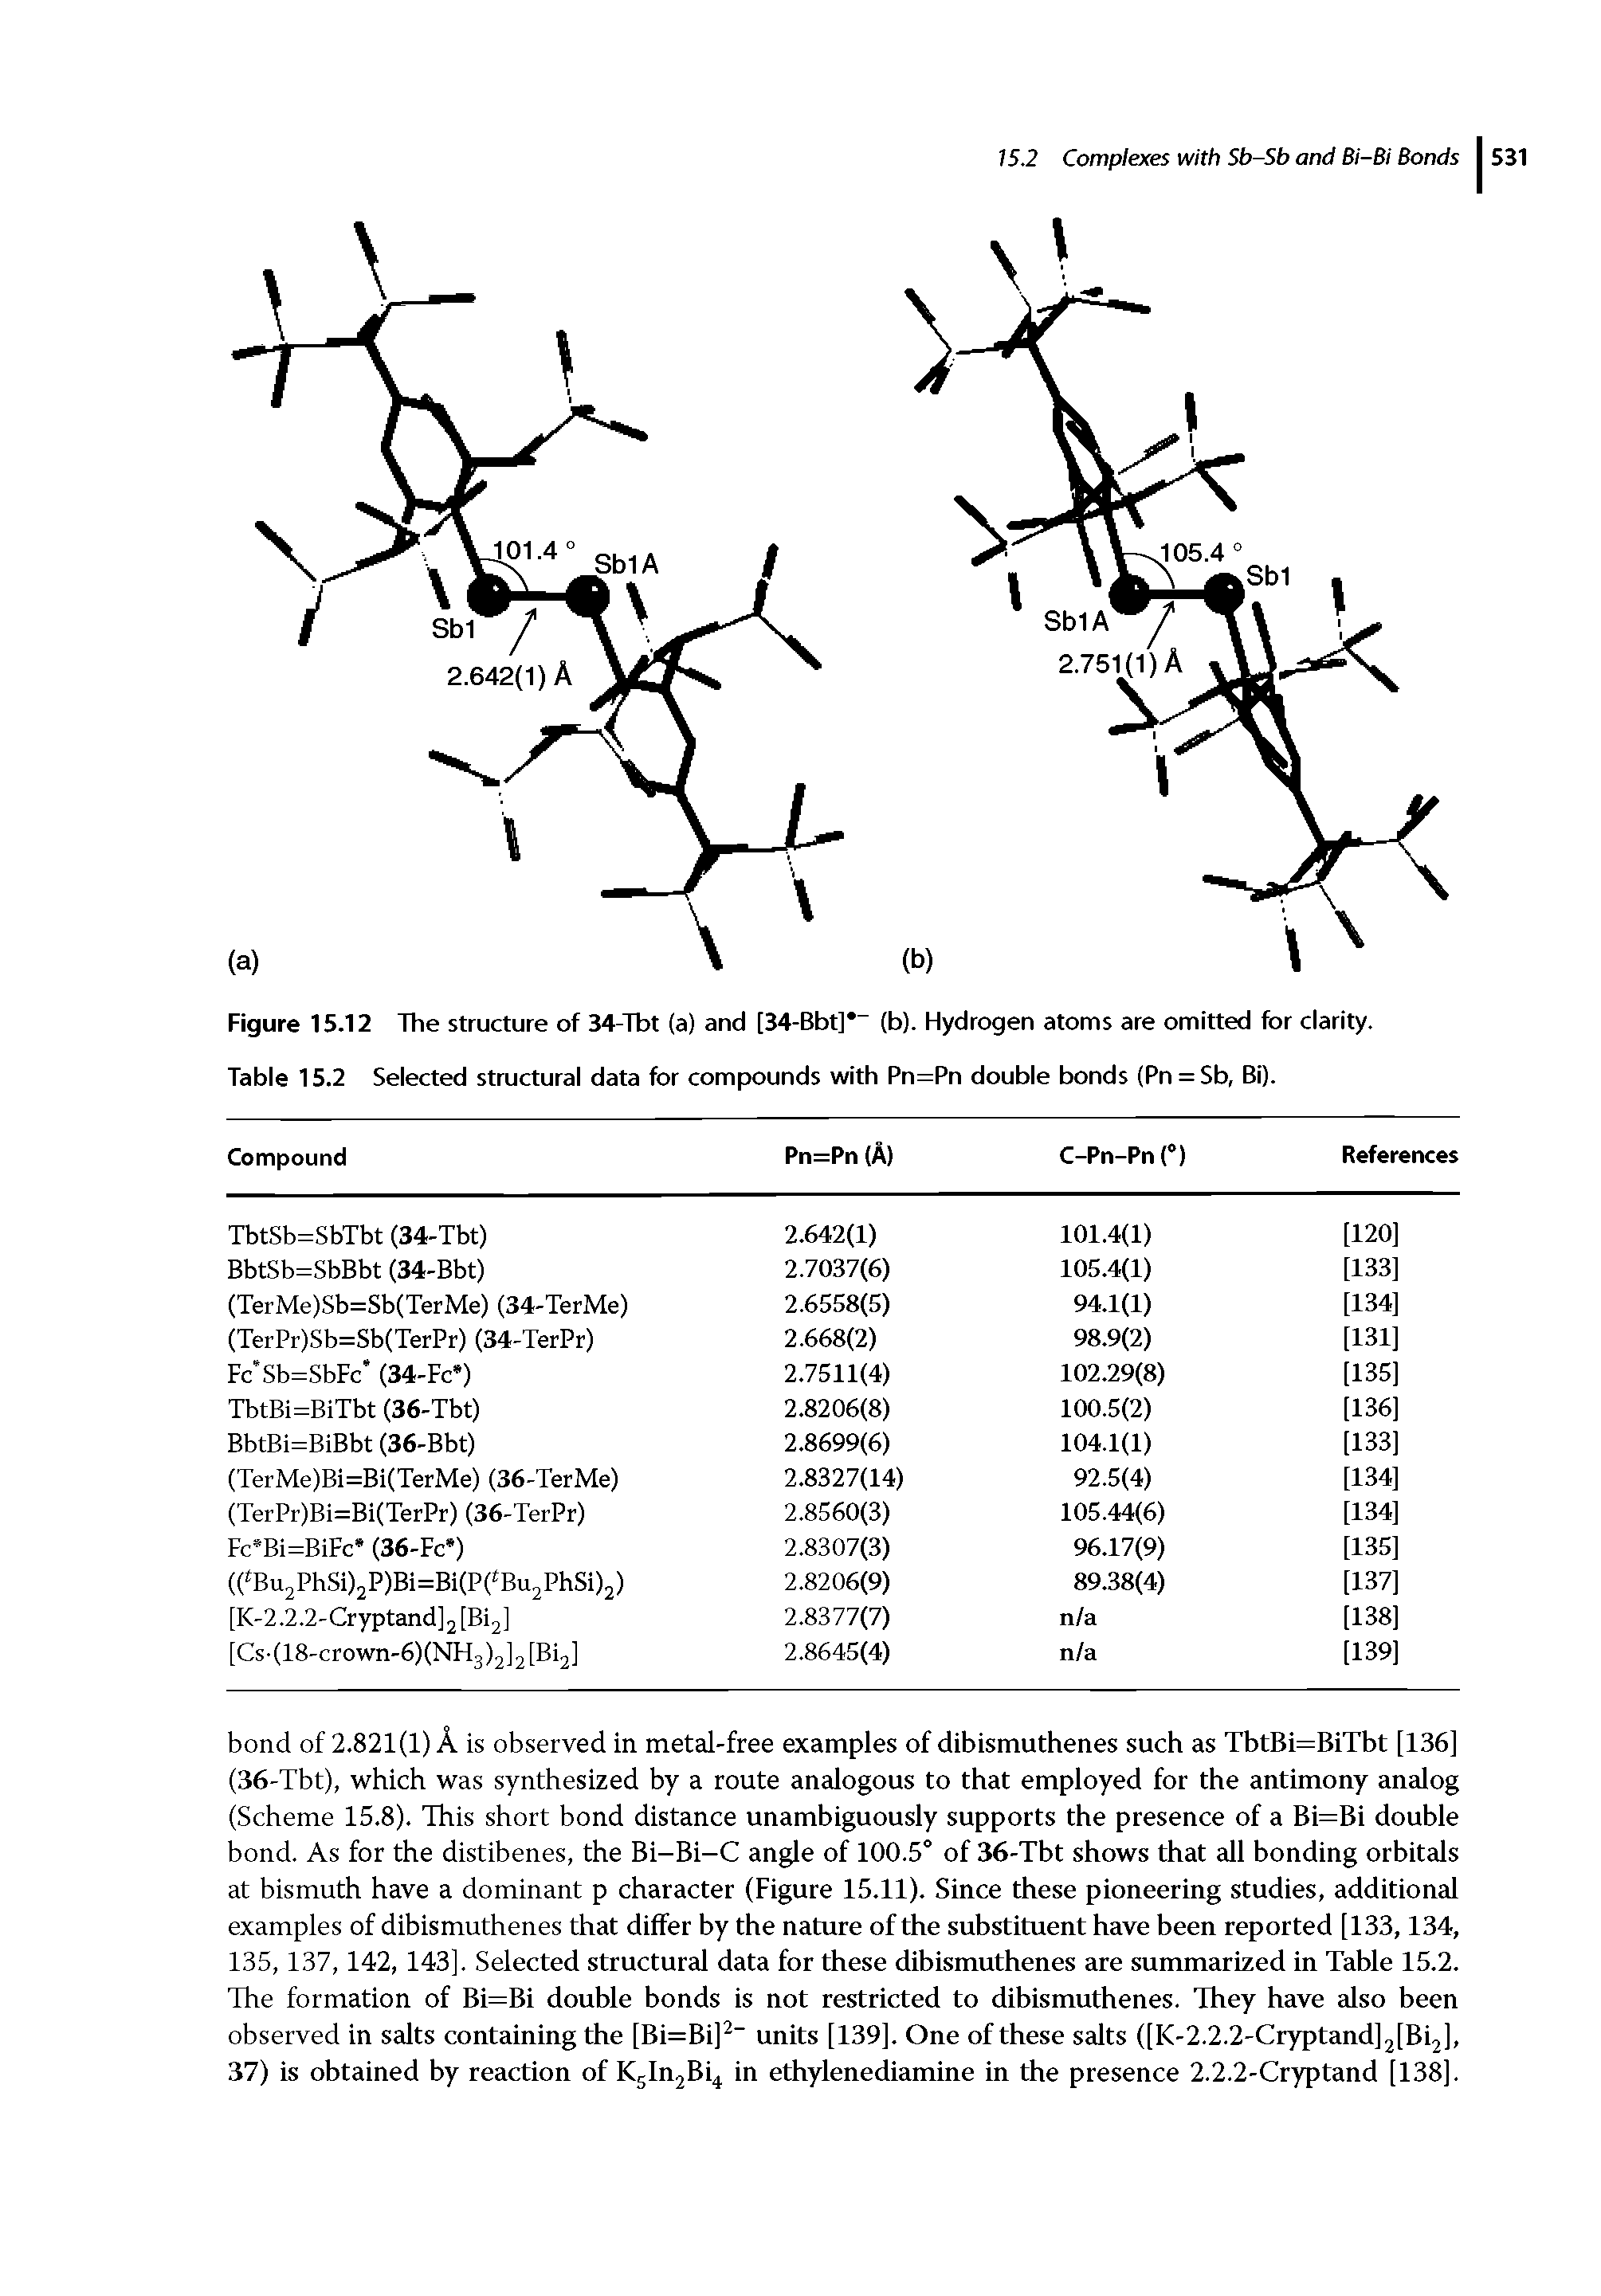 Figure 15.12 The structure of 34-Tbt (a) and [34-Bbt] (b). Hydrogen atoms are omitted for clarity. Table 15.2 Selected structural data for compounds with Pn=Pn double bonds (Pn = Sb, Bi).